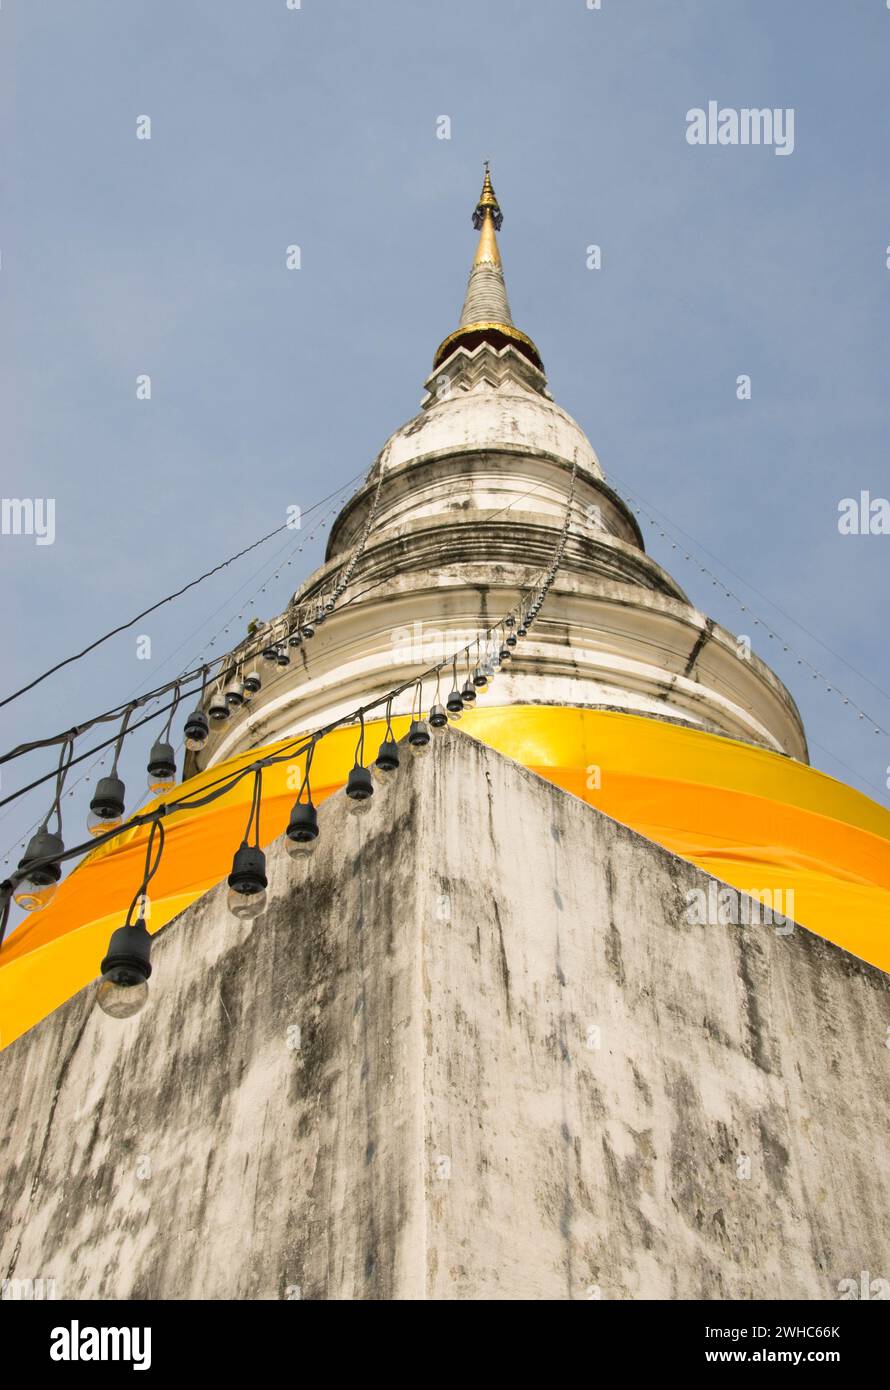 The temple Wat Phrasing in Chiang Mai. Stock Photo